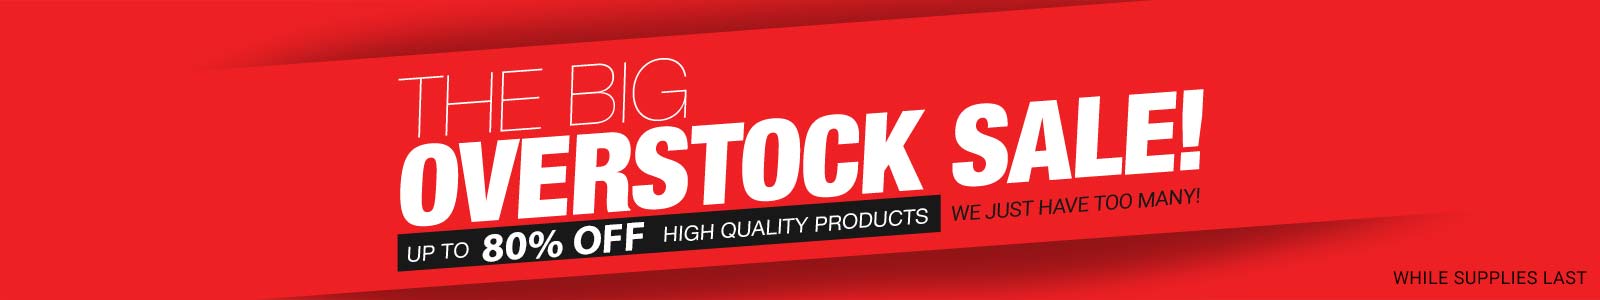 The Big Overstock Sale! Up to 80% off high quality products. We just have too many! While Supplies Last